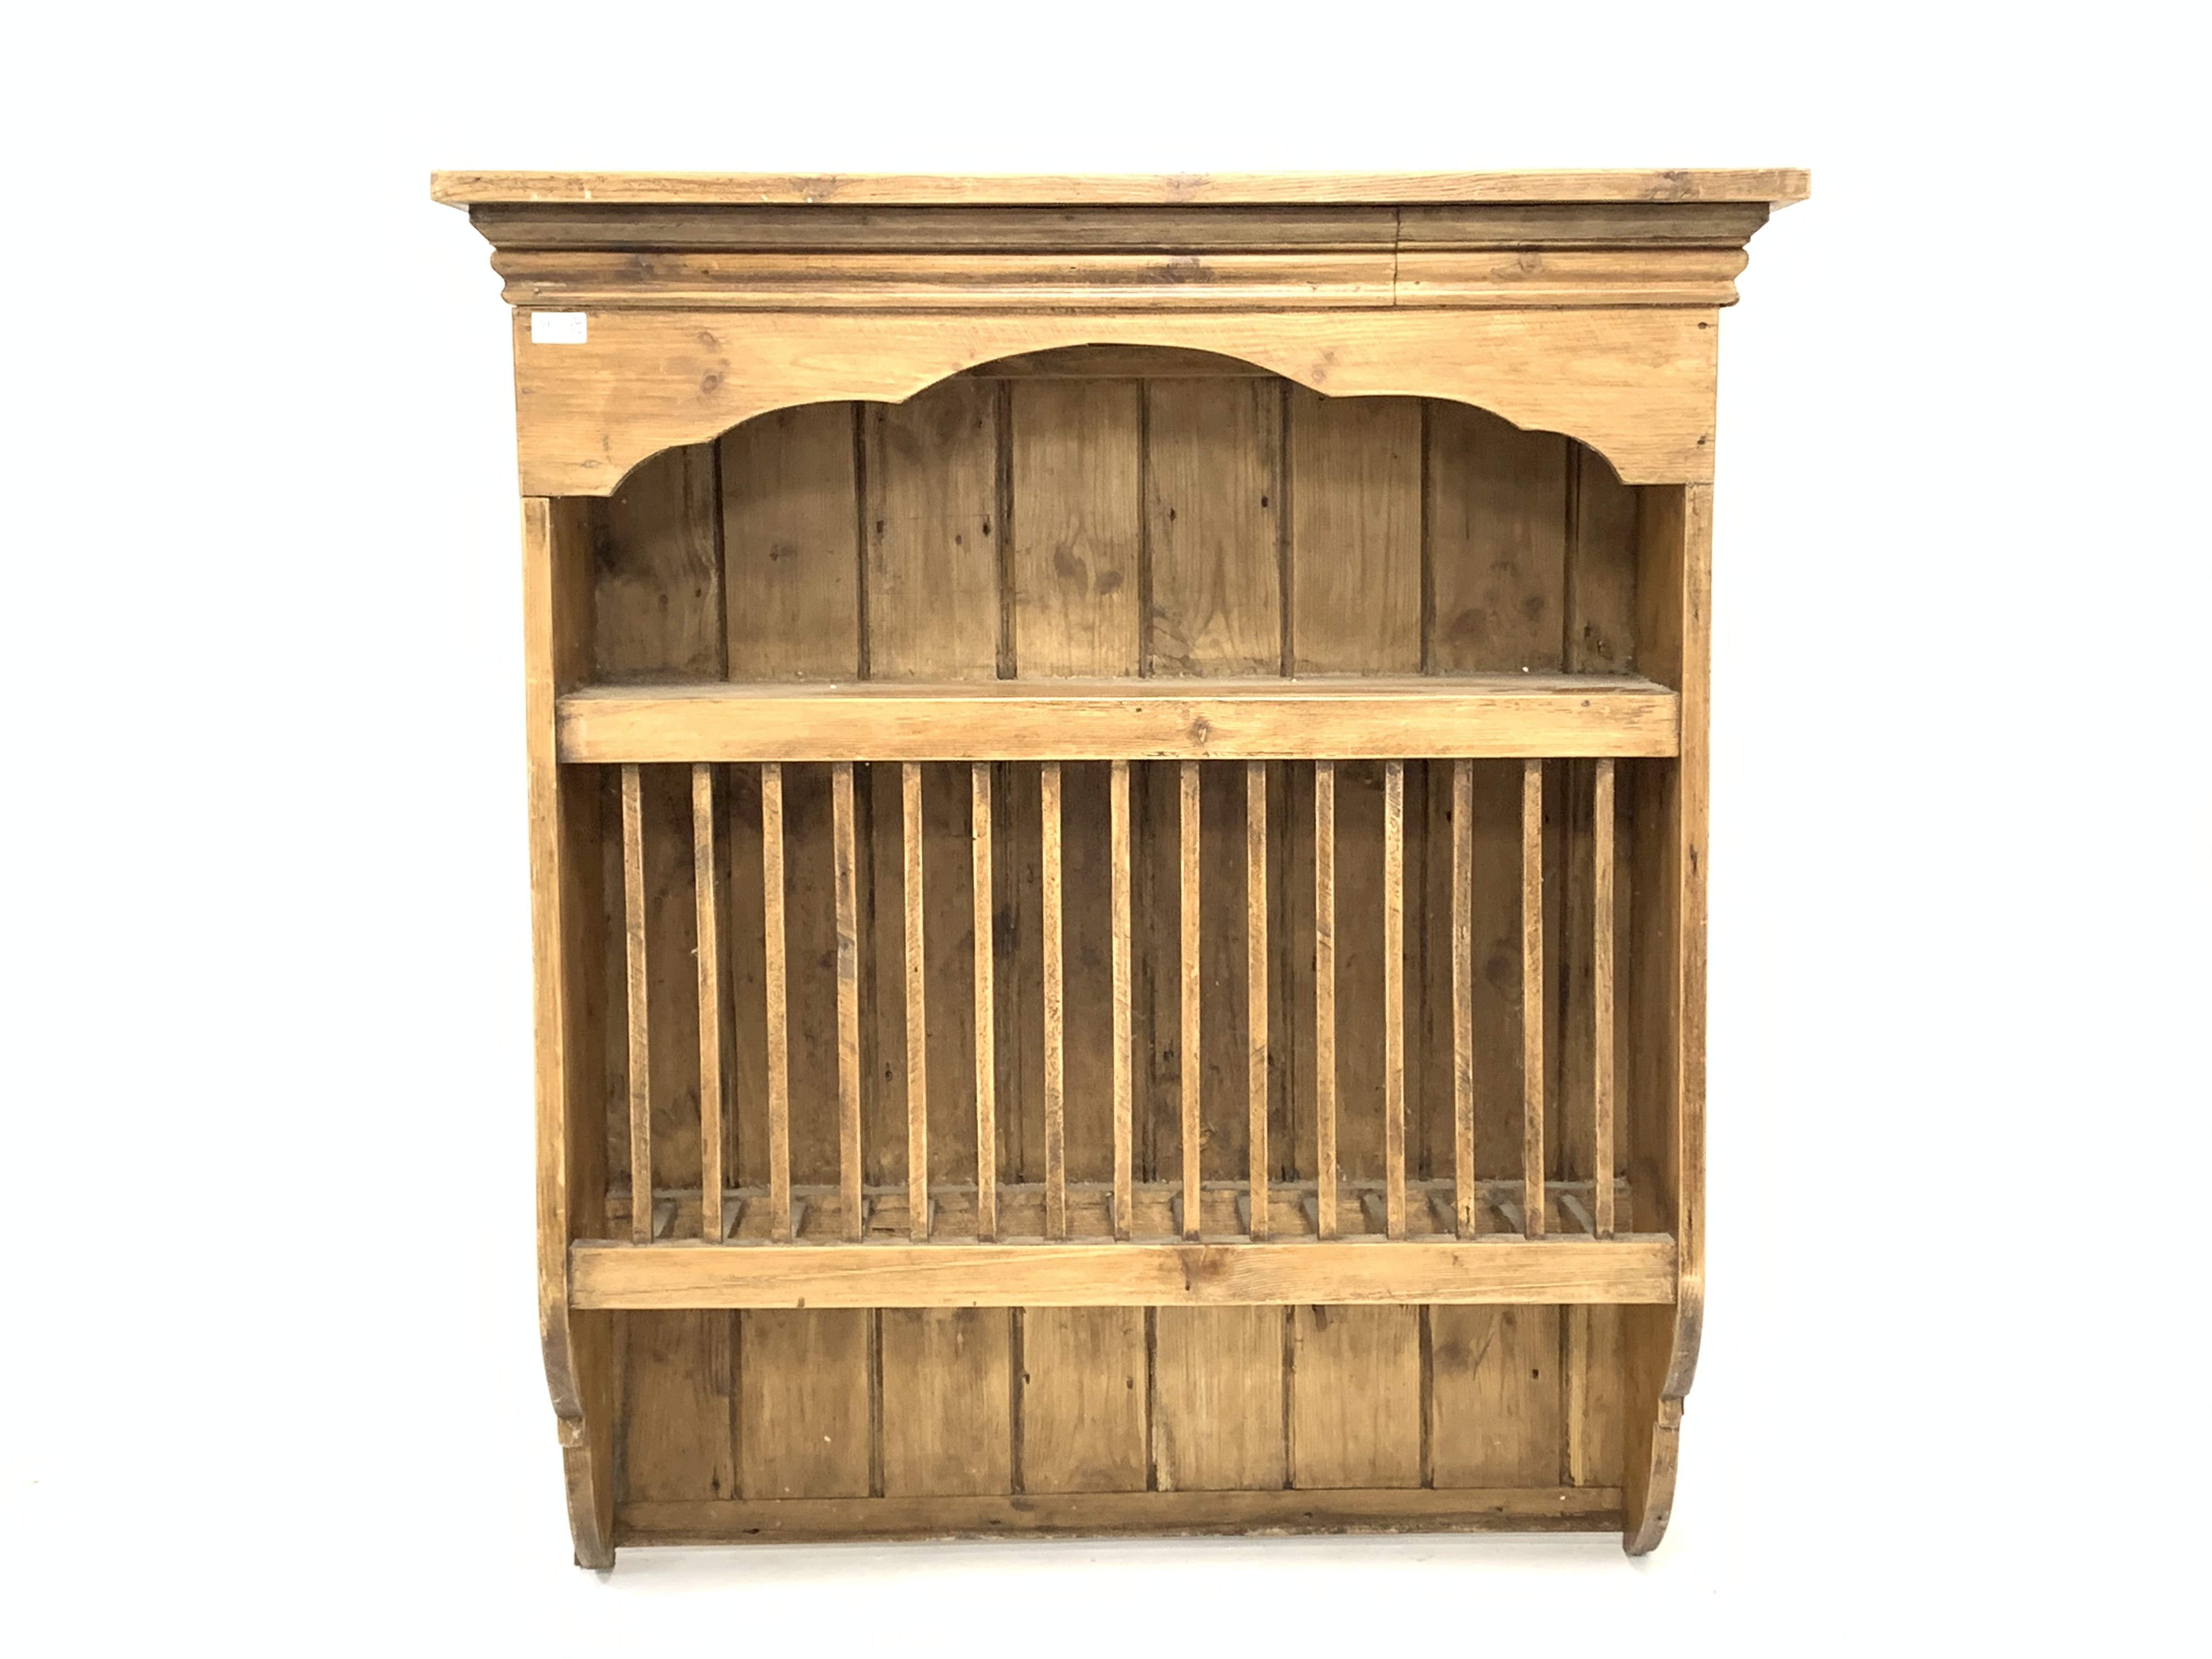 19th century pine wall mounted plate rack,